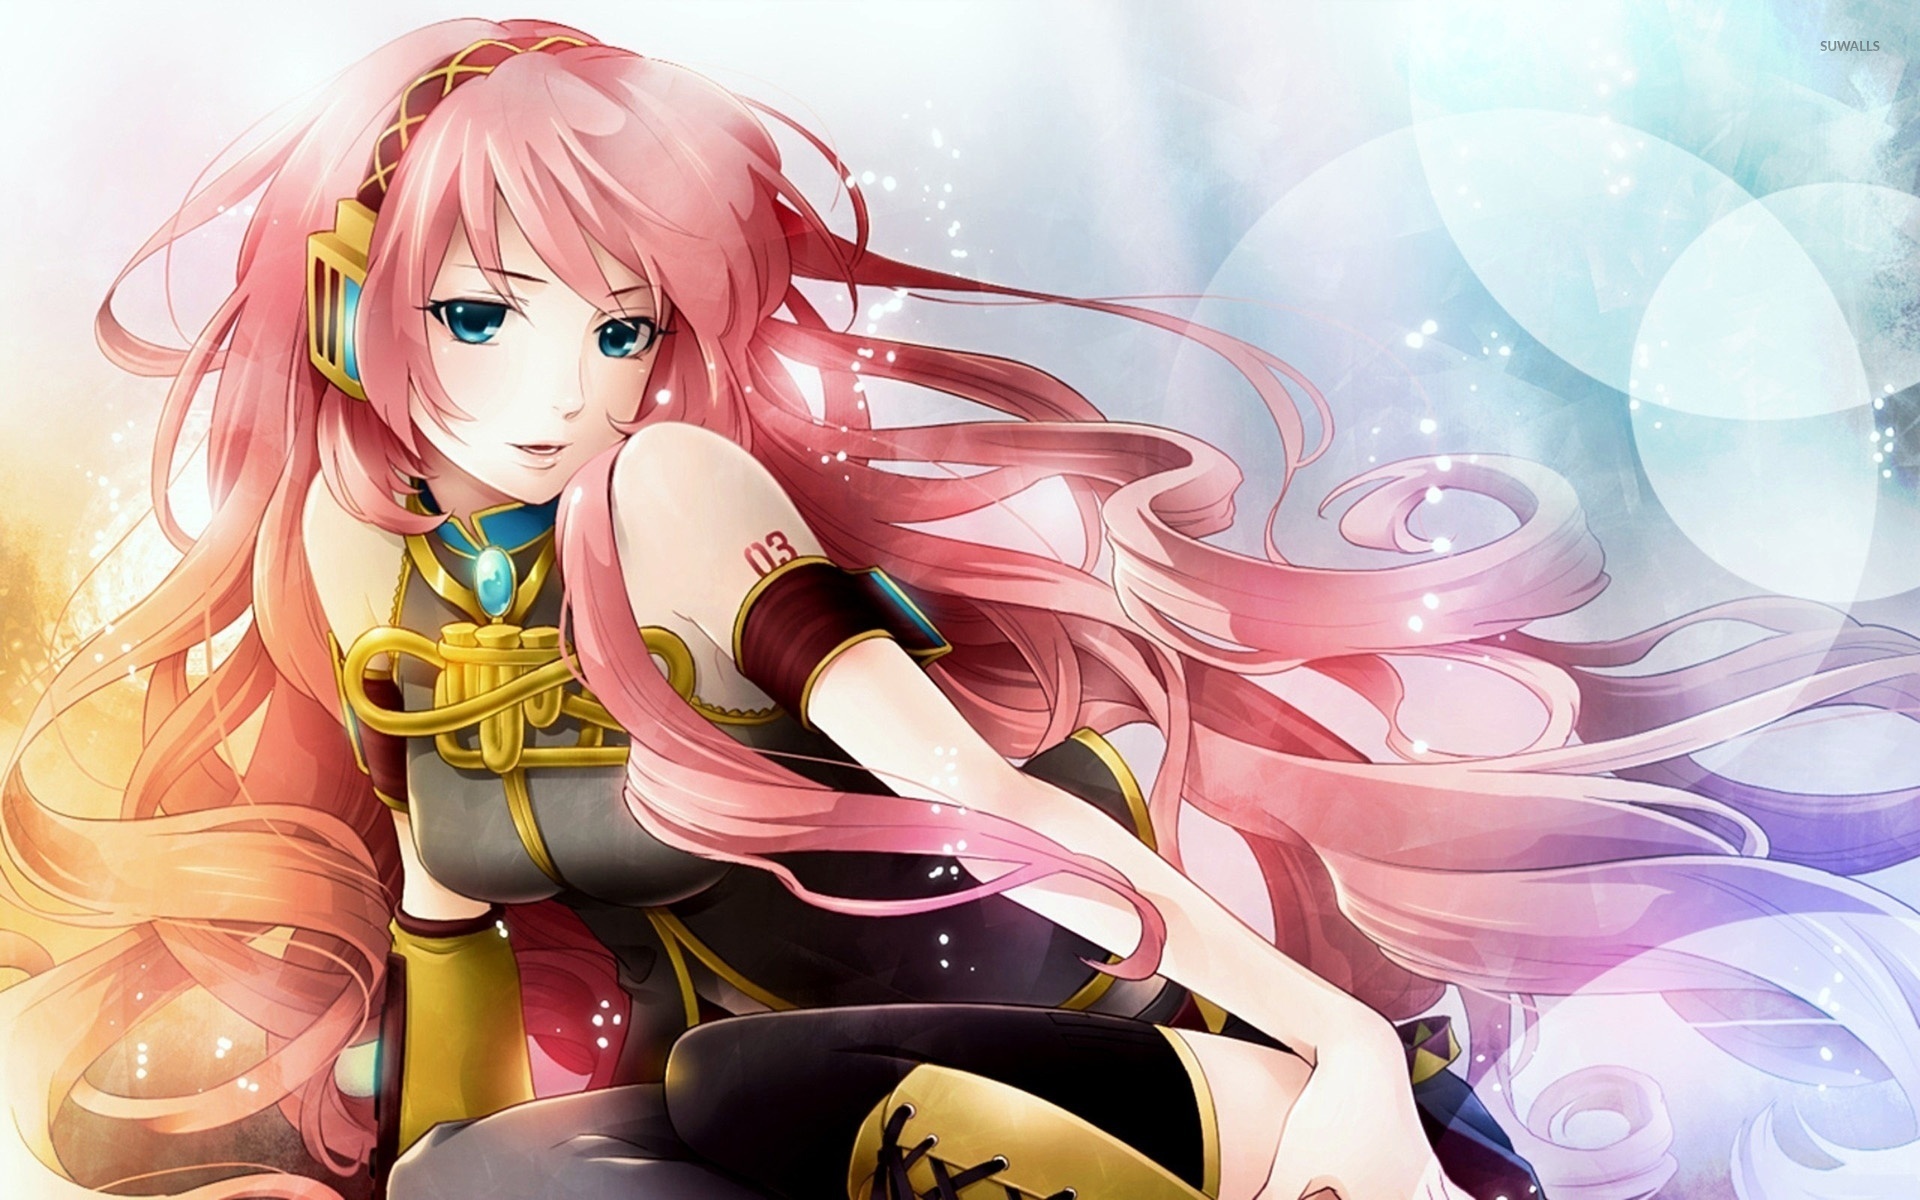 Ia From Vocaloid Wallpaper Anime Wallpapers 565